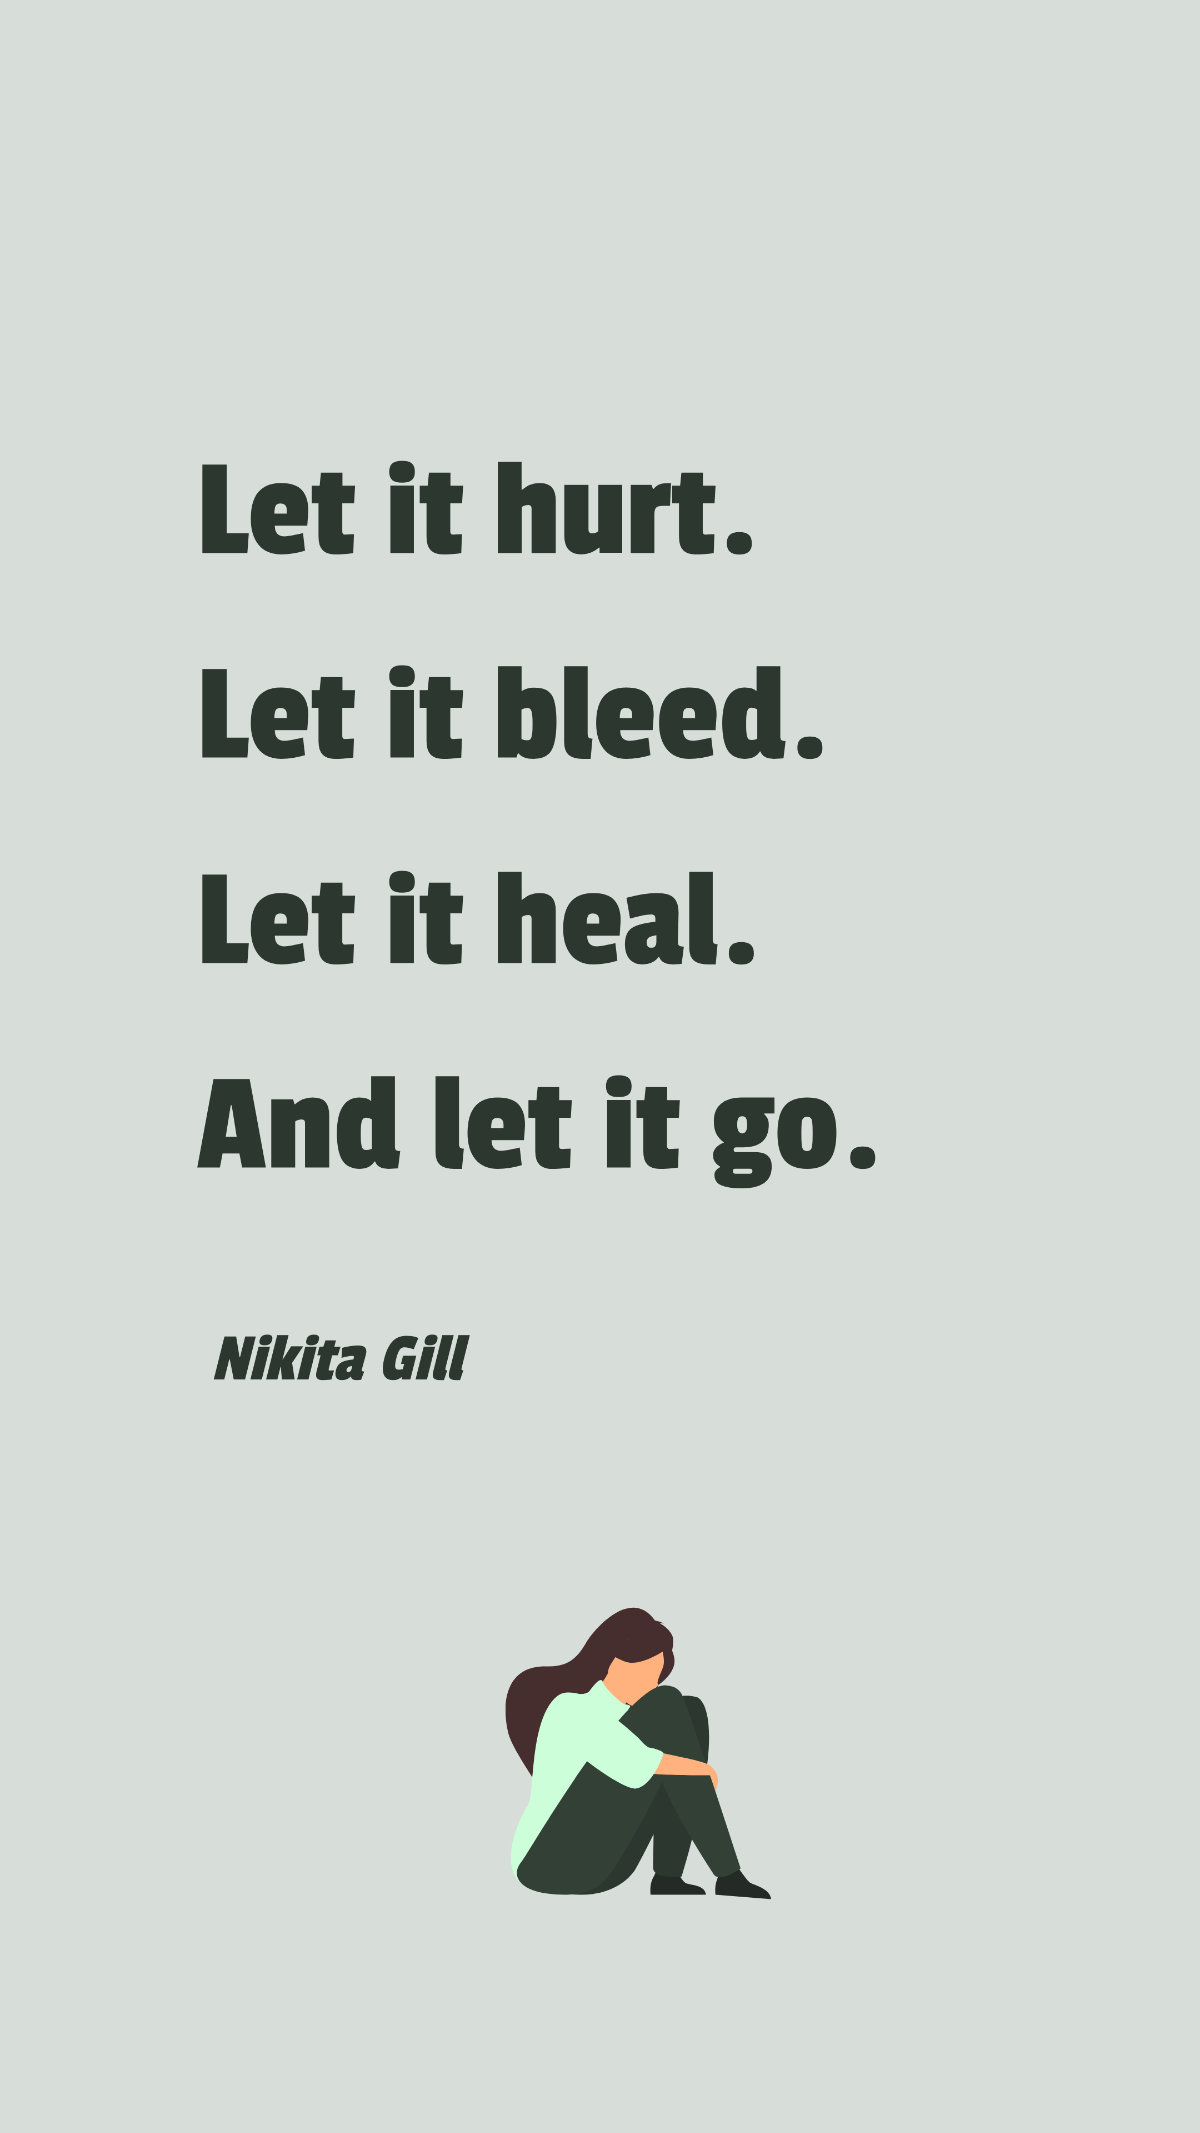 Nikita Gill - Let it hurt. Let it bleed. Let it heal. And let it go. Template